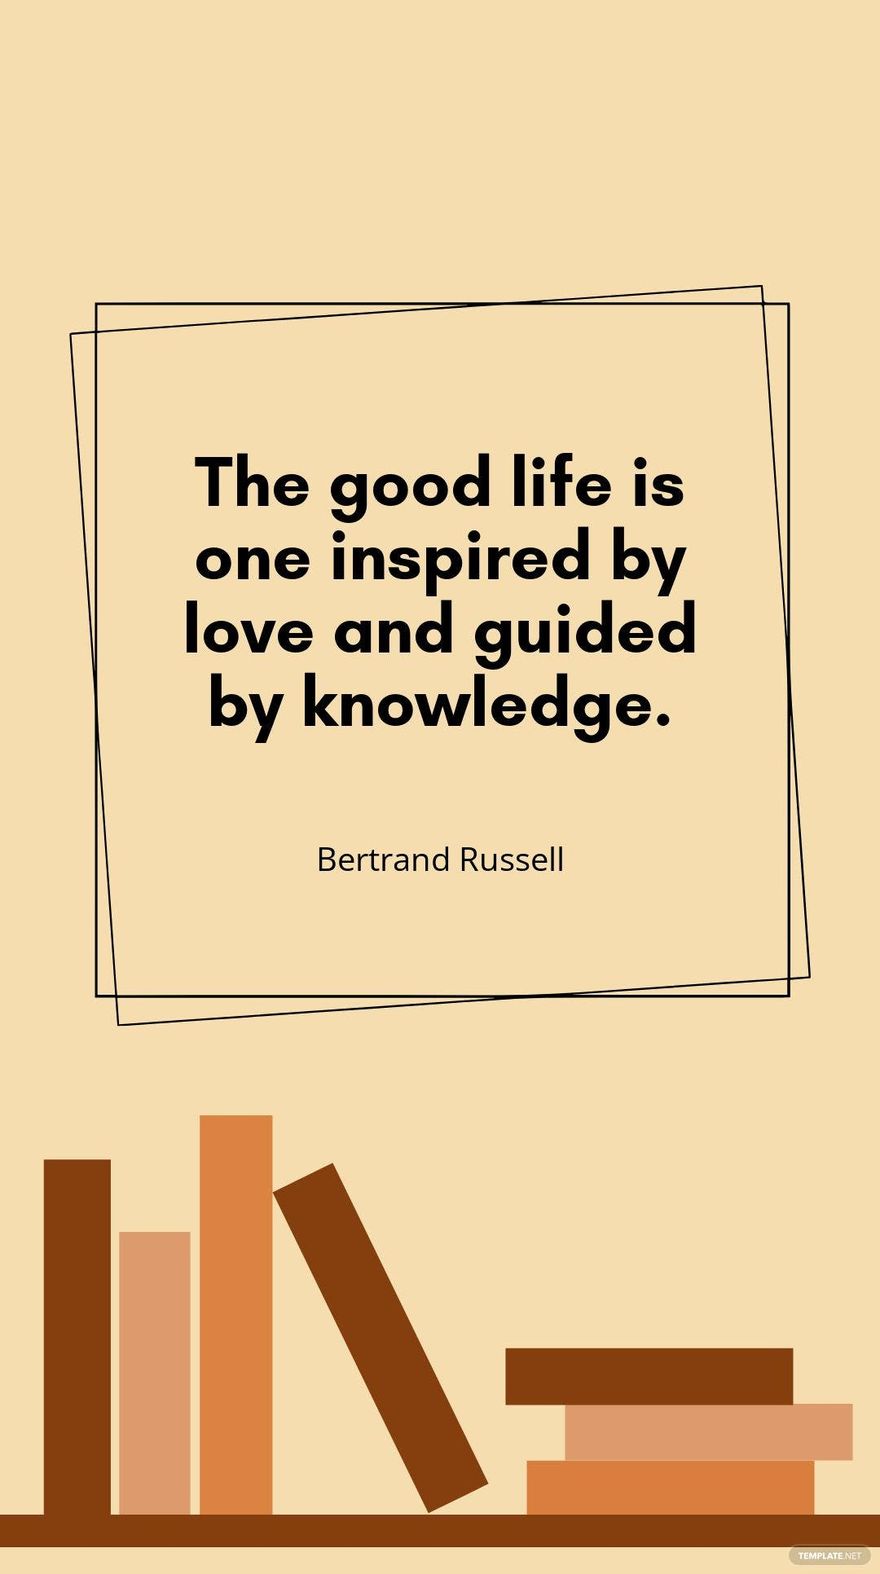 Bertrand Russell - "The good life is one inspired by love and guided by knowledge."